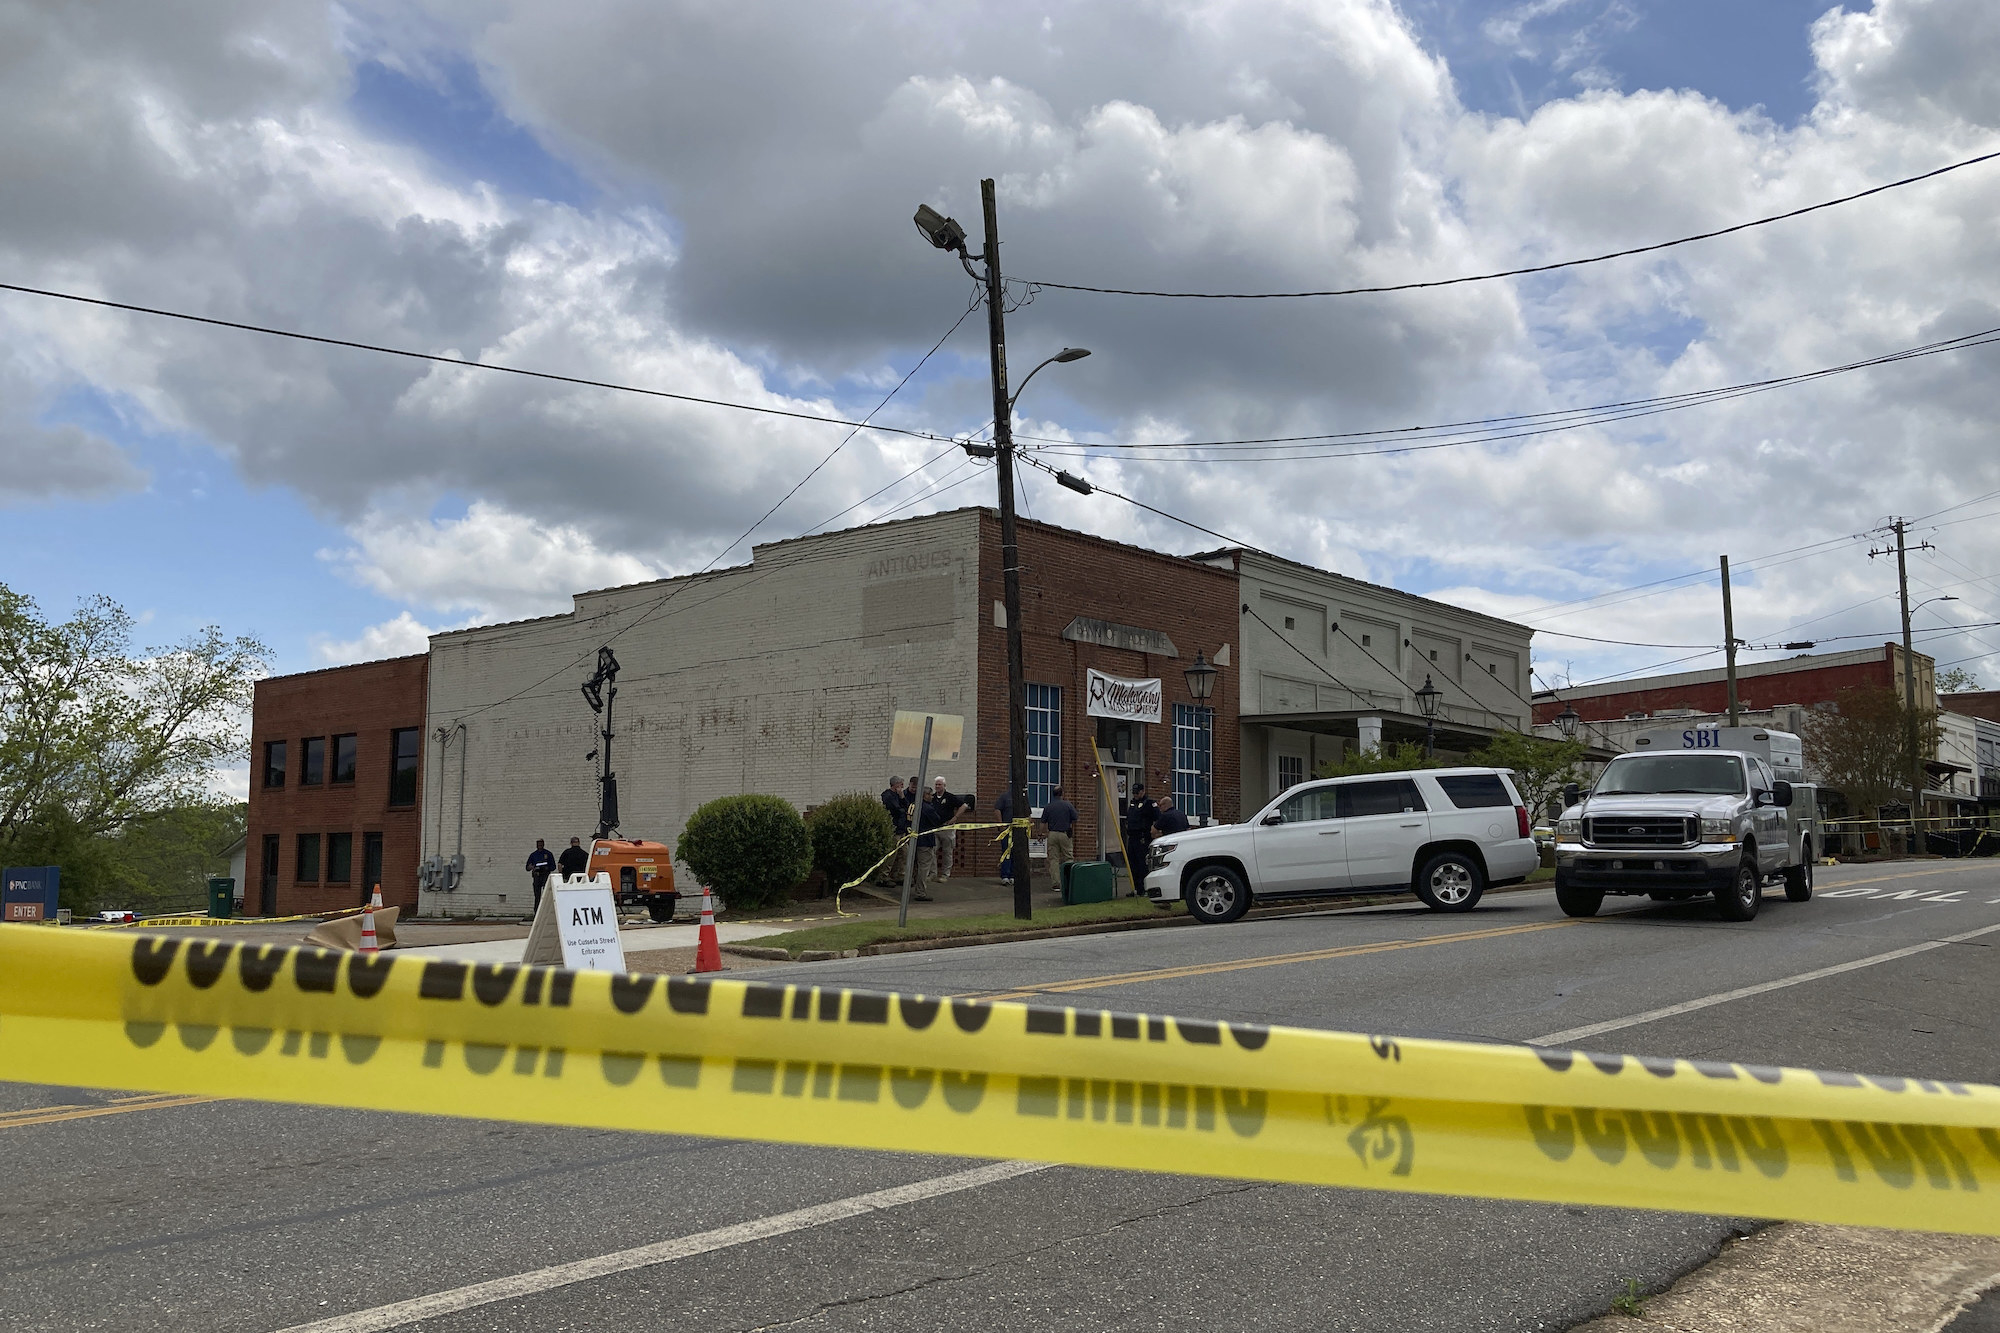 Dadeville, Alabama, Birthday Party Shooting Leaves 4 Dead